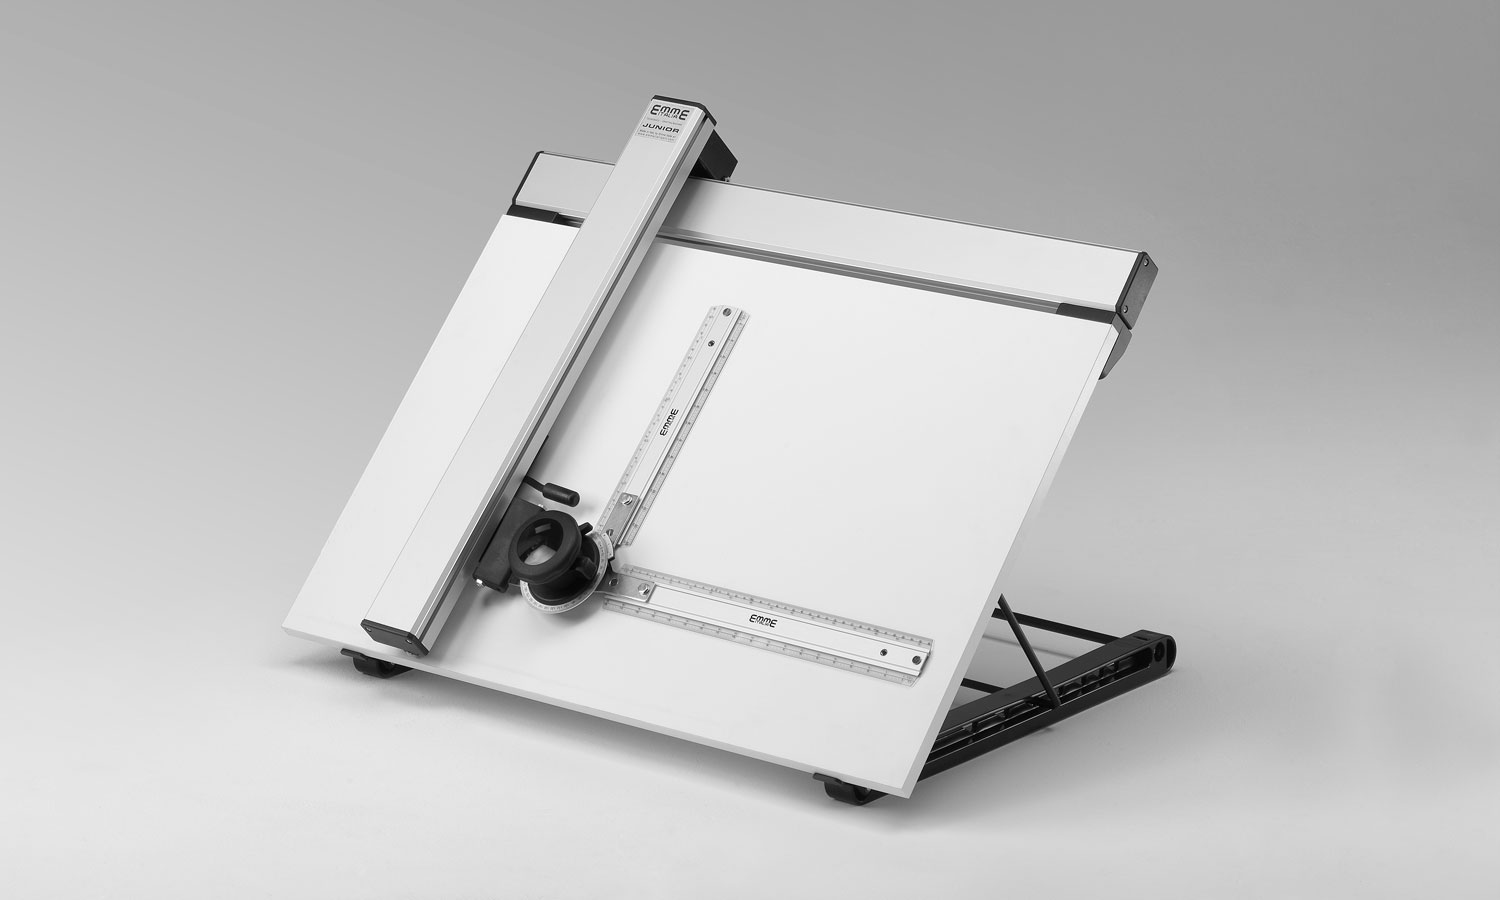 Drawing boards with parallel motion ruler or drafting machine - Emme Italia